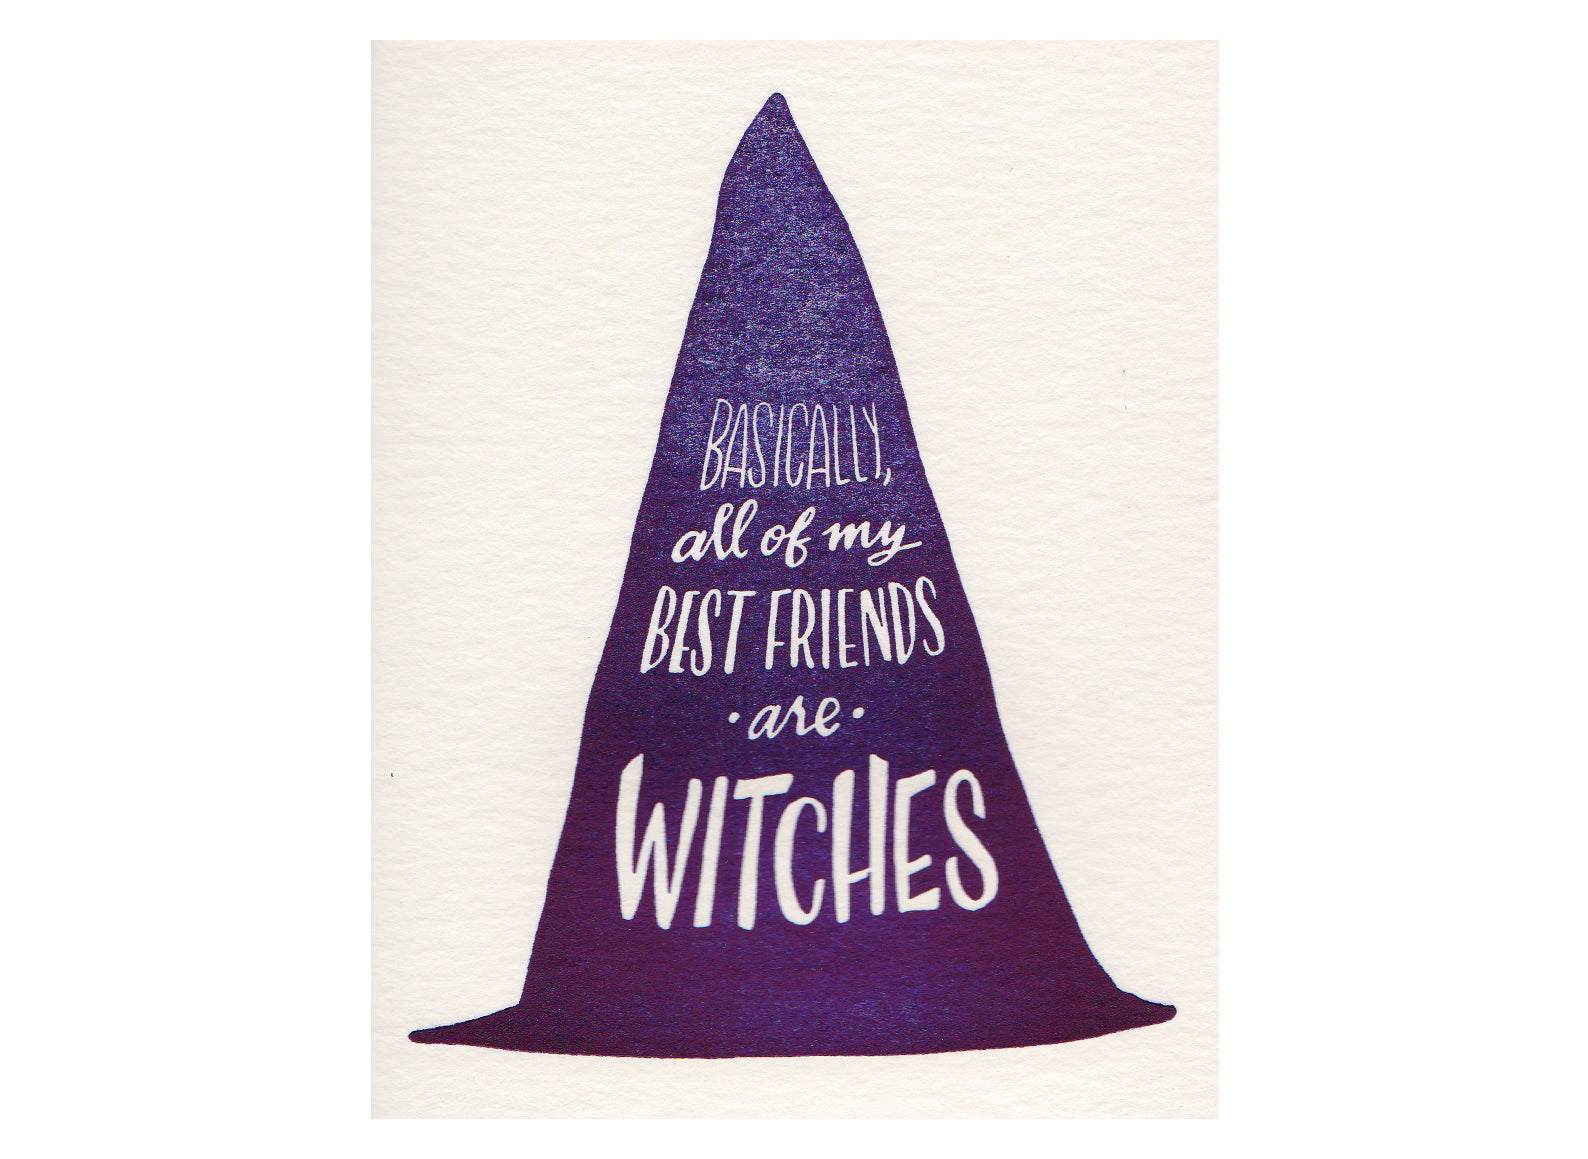 BASICALLY, ALL OF MY BEST FRIENDS ARE WITCHES